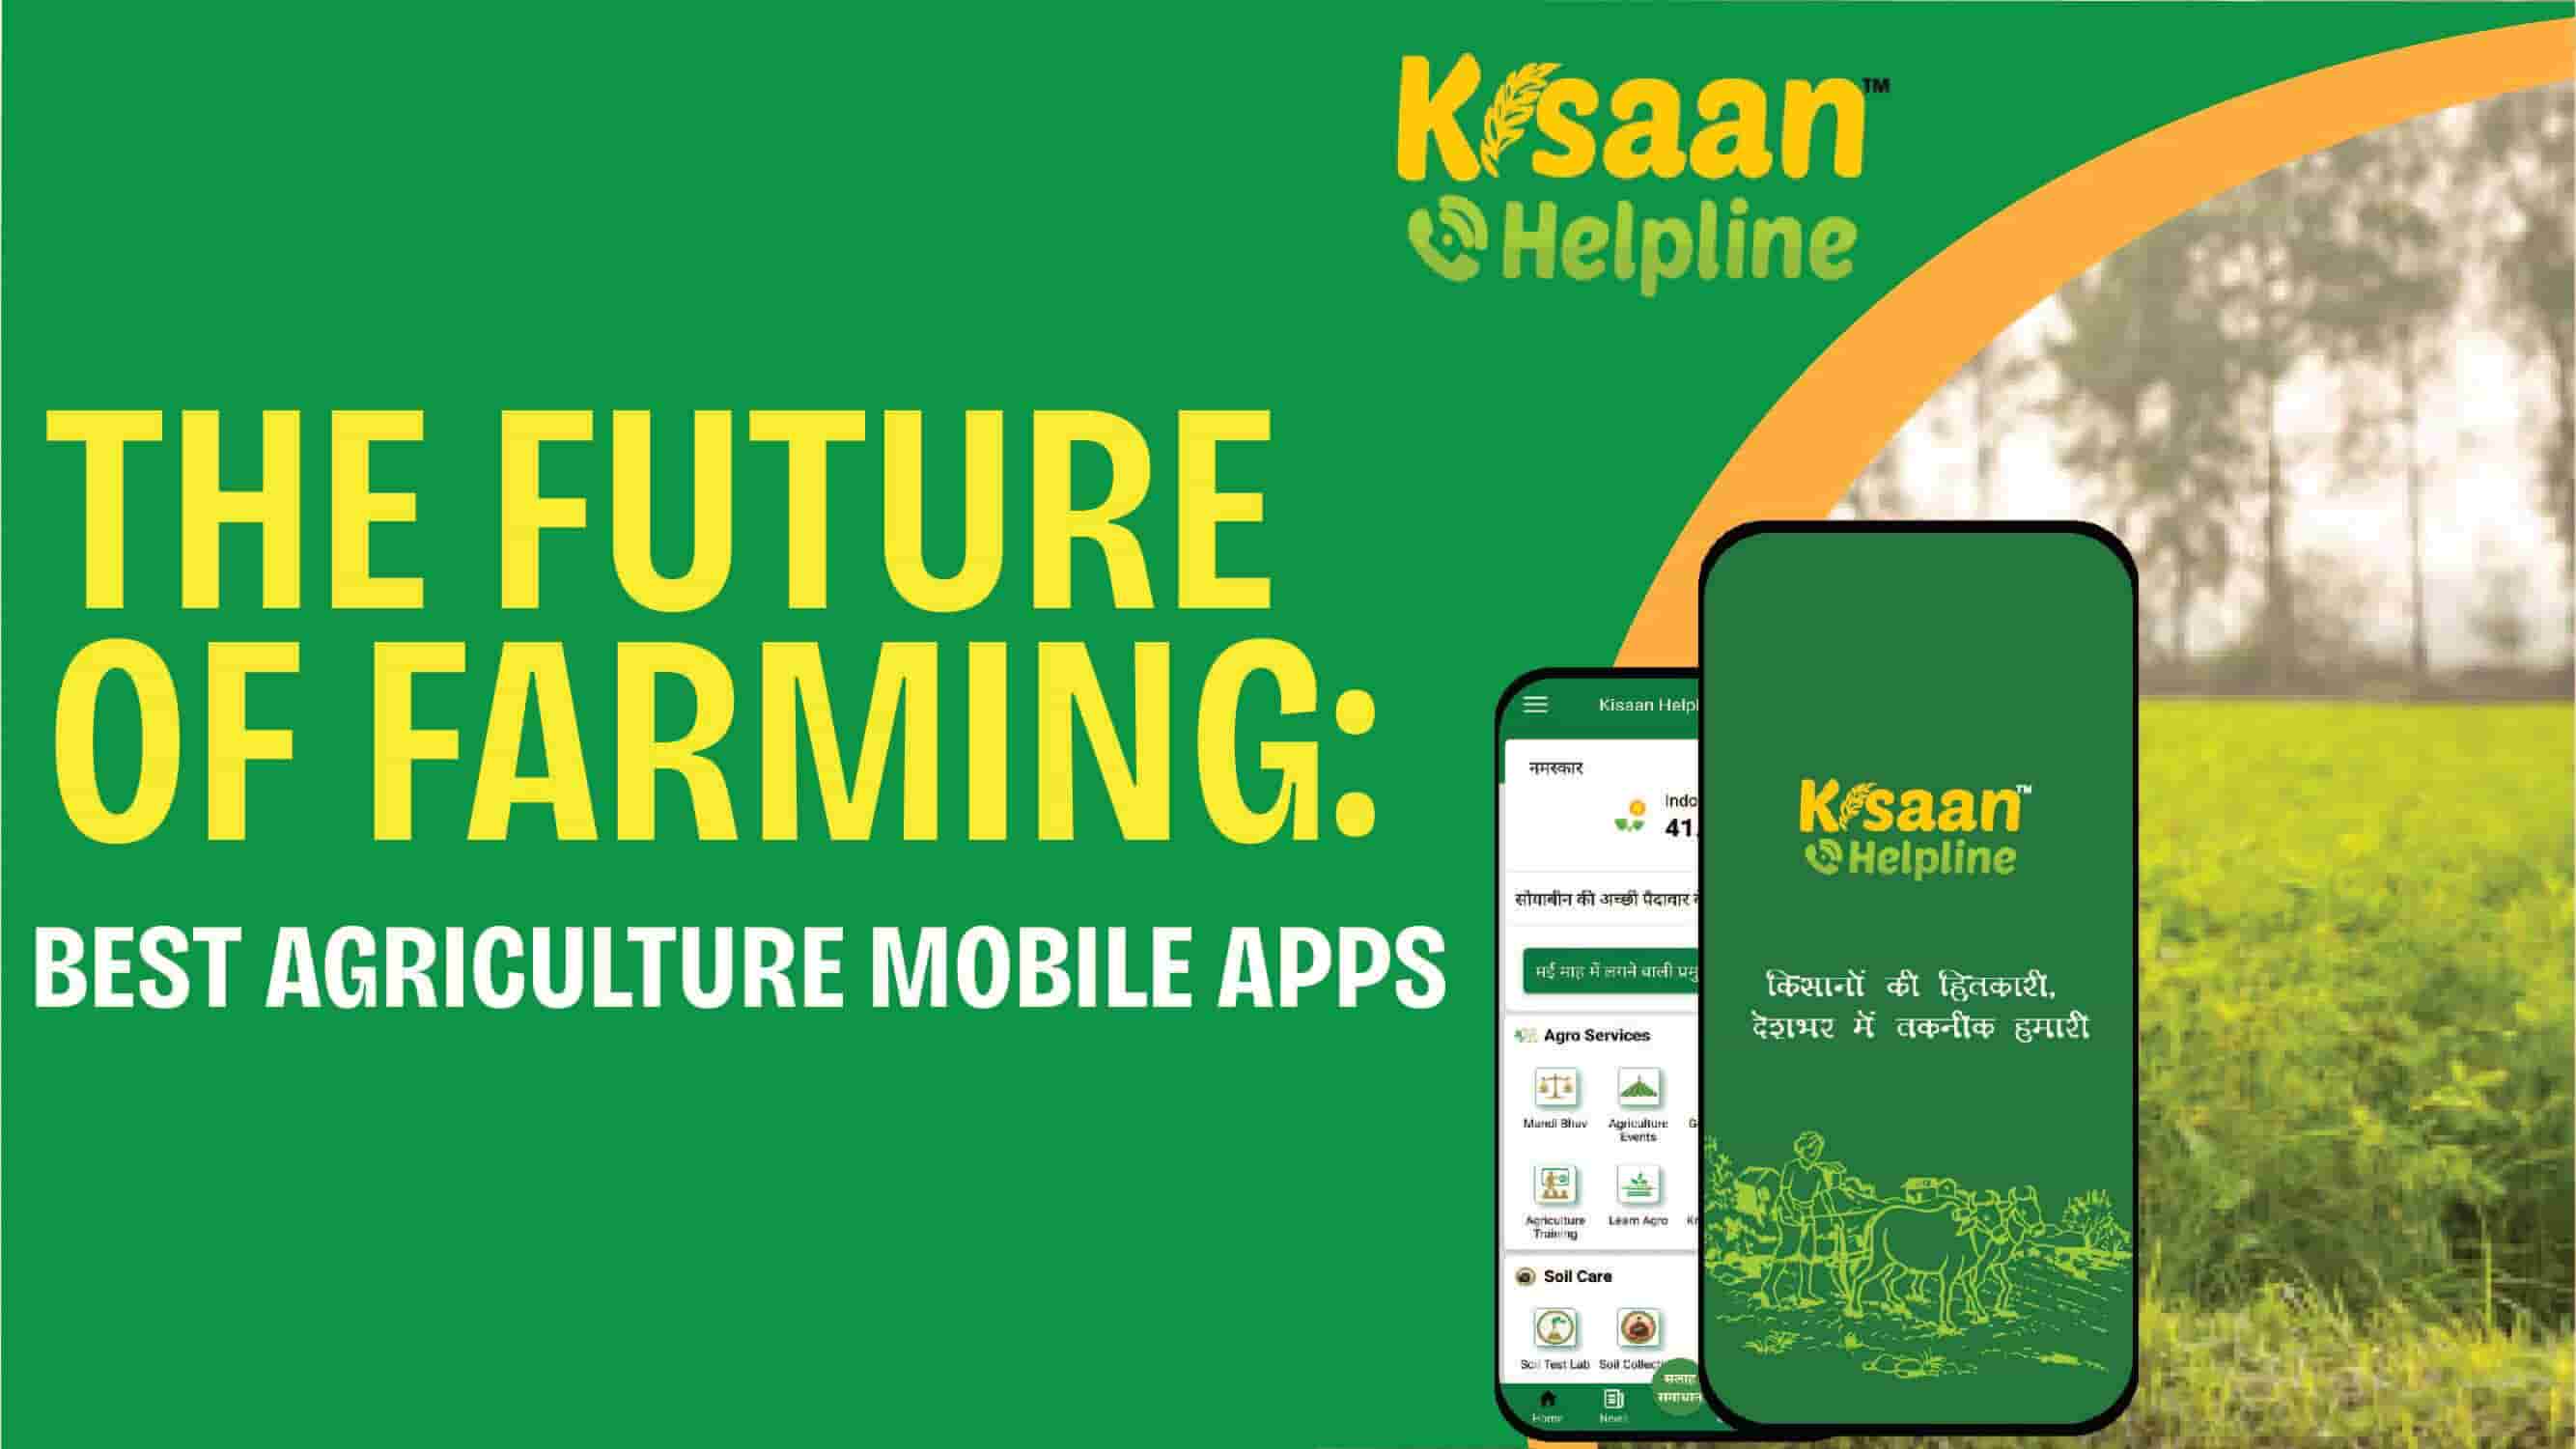 The Future of Farming: Best Agriculture Mobile Apps